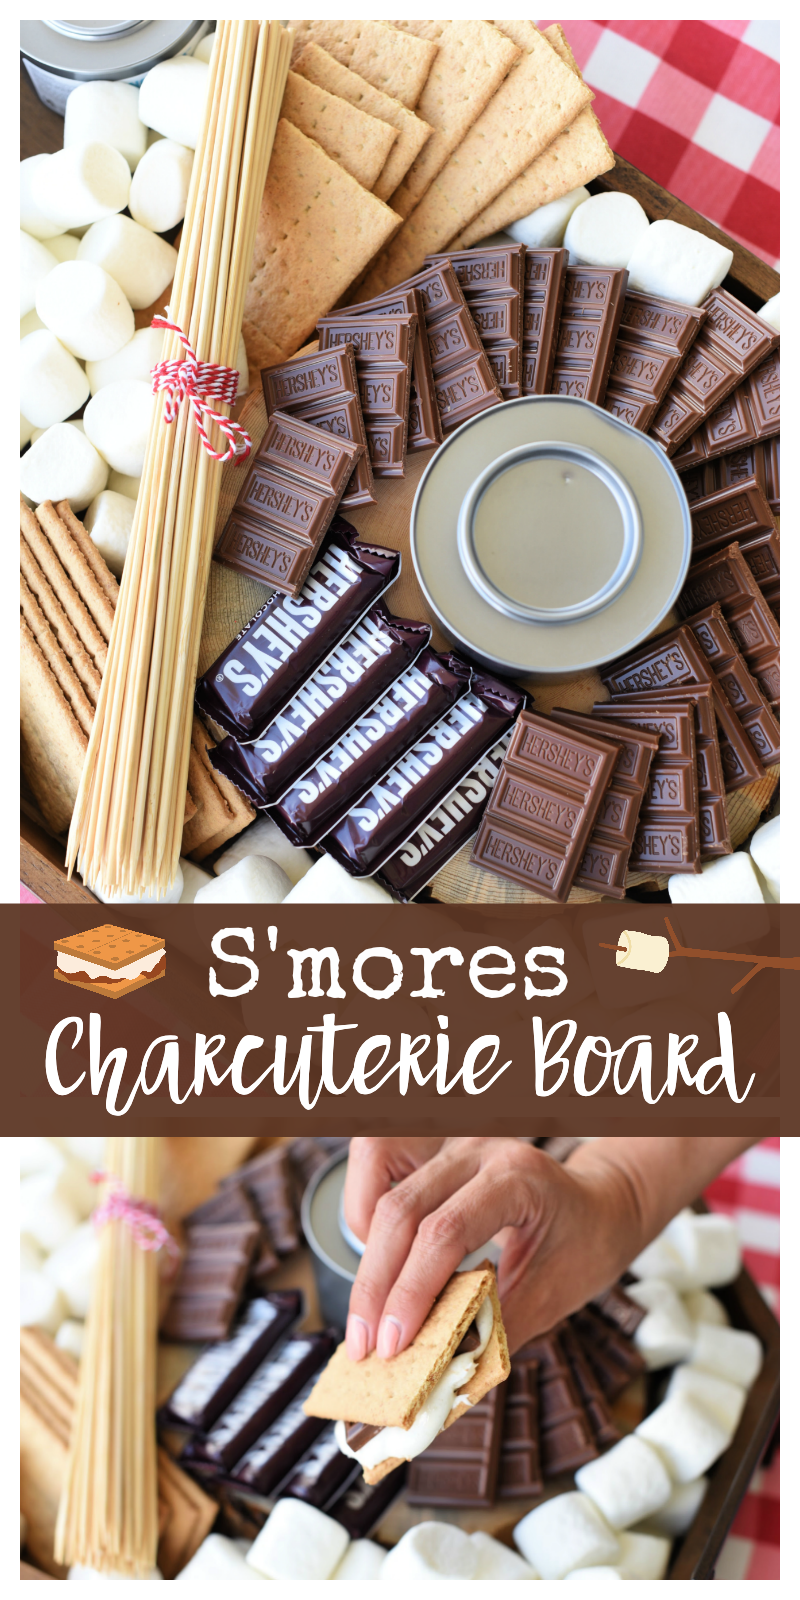 Simple S'mores charcuterie board idea. Make your own s'mores charcuterie board for your next summer party. So simple and so fun. #smores #smorescharcuterieboard #charcuterieboard #funpartyidea